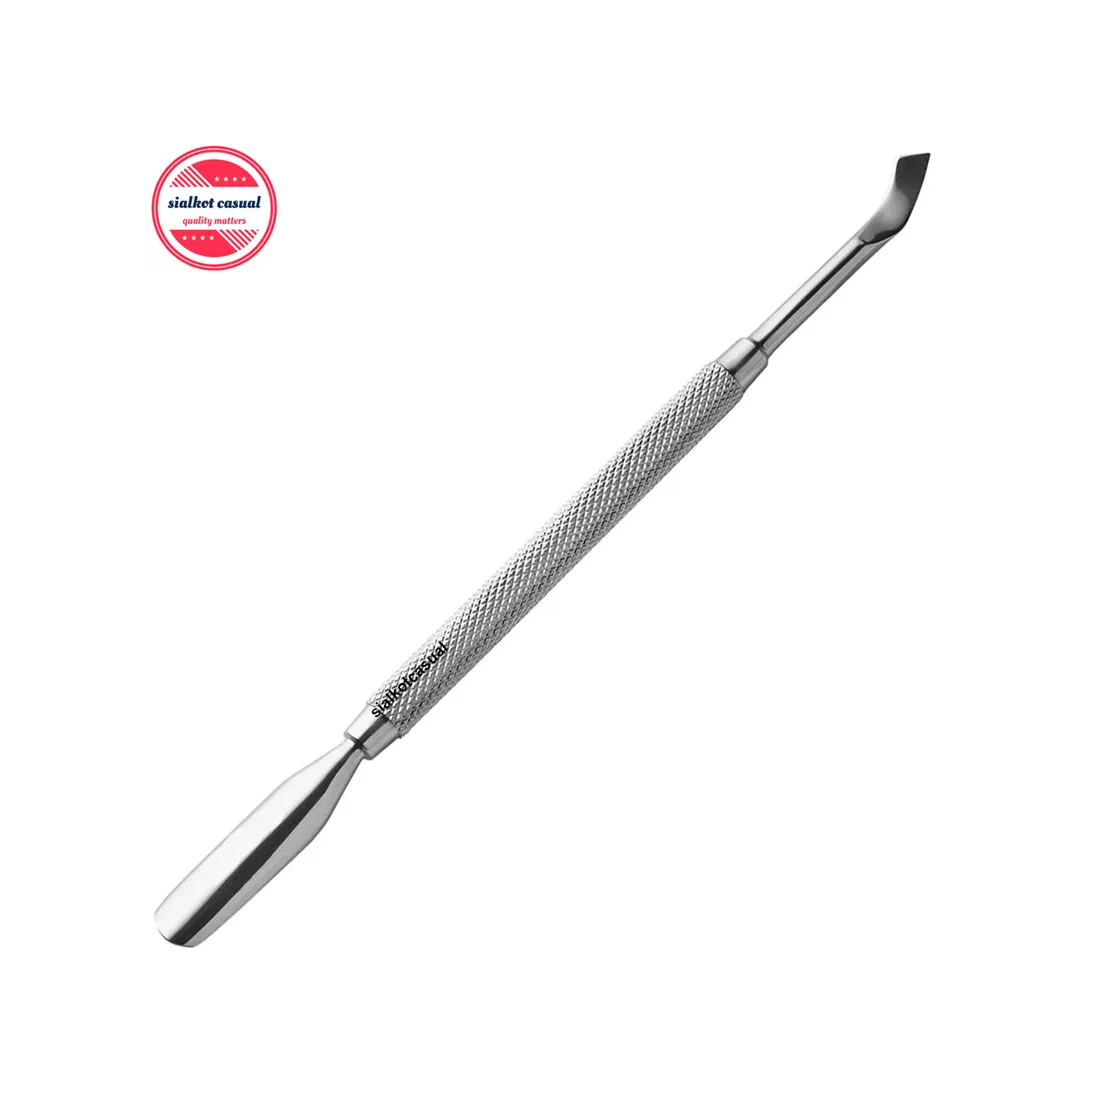 Cuticle Pusher Manicure En Pedicure Nail Care Double Ended Cuticle Nail Pusher Beauty & Persoonlijke Verzorging Rvs